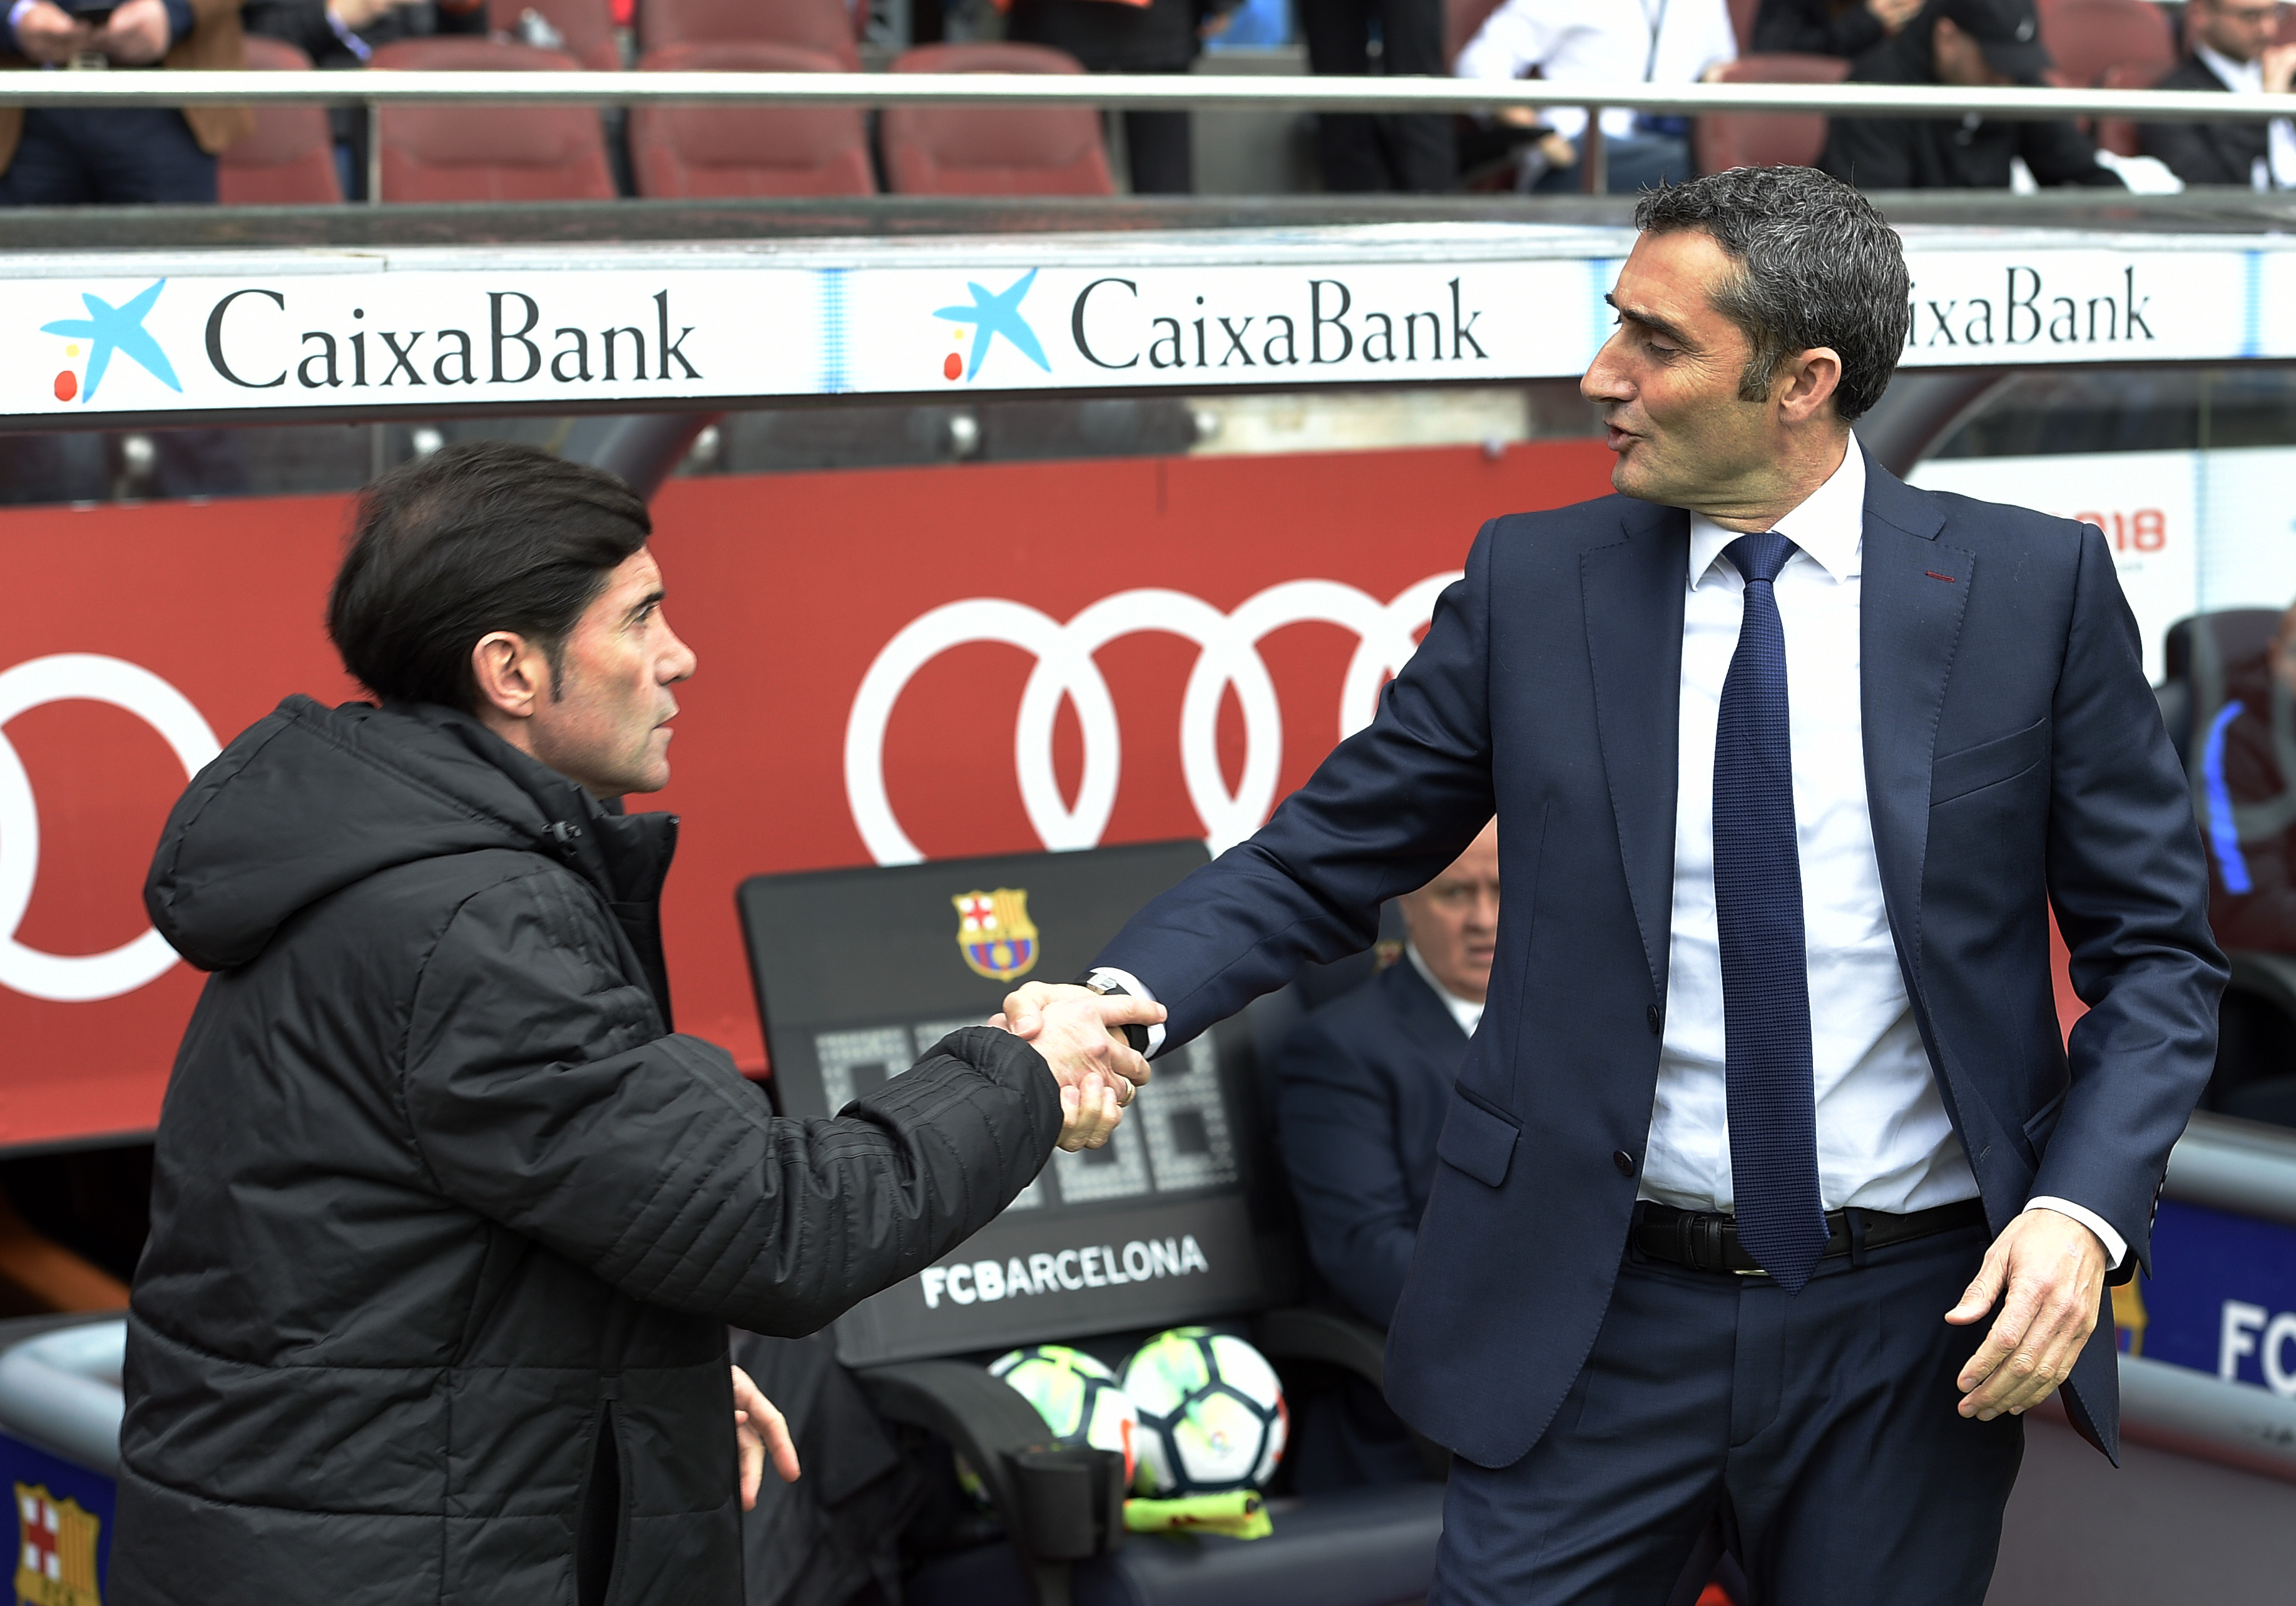 Barcelona's Spanish coach Ernesto Valverde (R) shakes hands with Valencia's Spanish coach Marcelino Garcia Toral during the Spanish league footbal match between FC Barcelona and Valencia CF at the Camp Nou stadium in Barcelona on April 14, 2018. / AFP PHOTO / LLUIS GENE        (Photo credit should read LLUIS GENE/AFP/Getty Images)